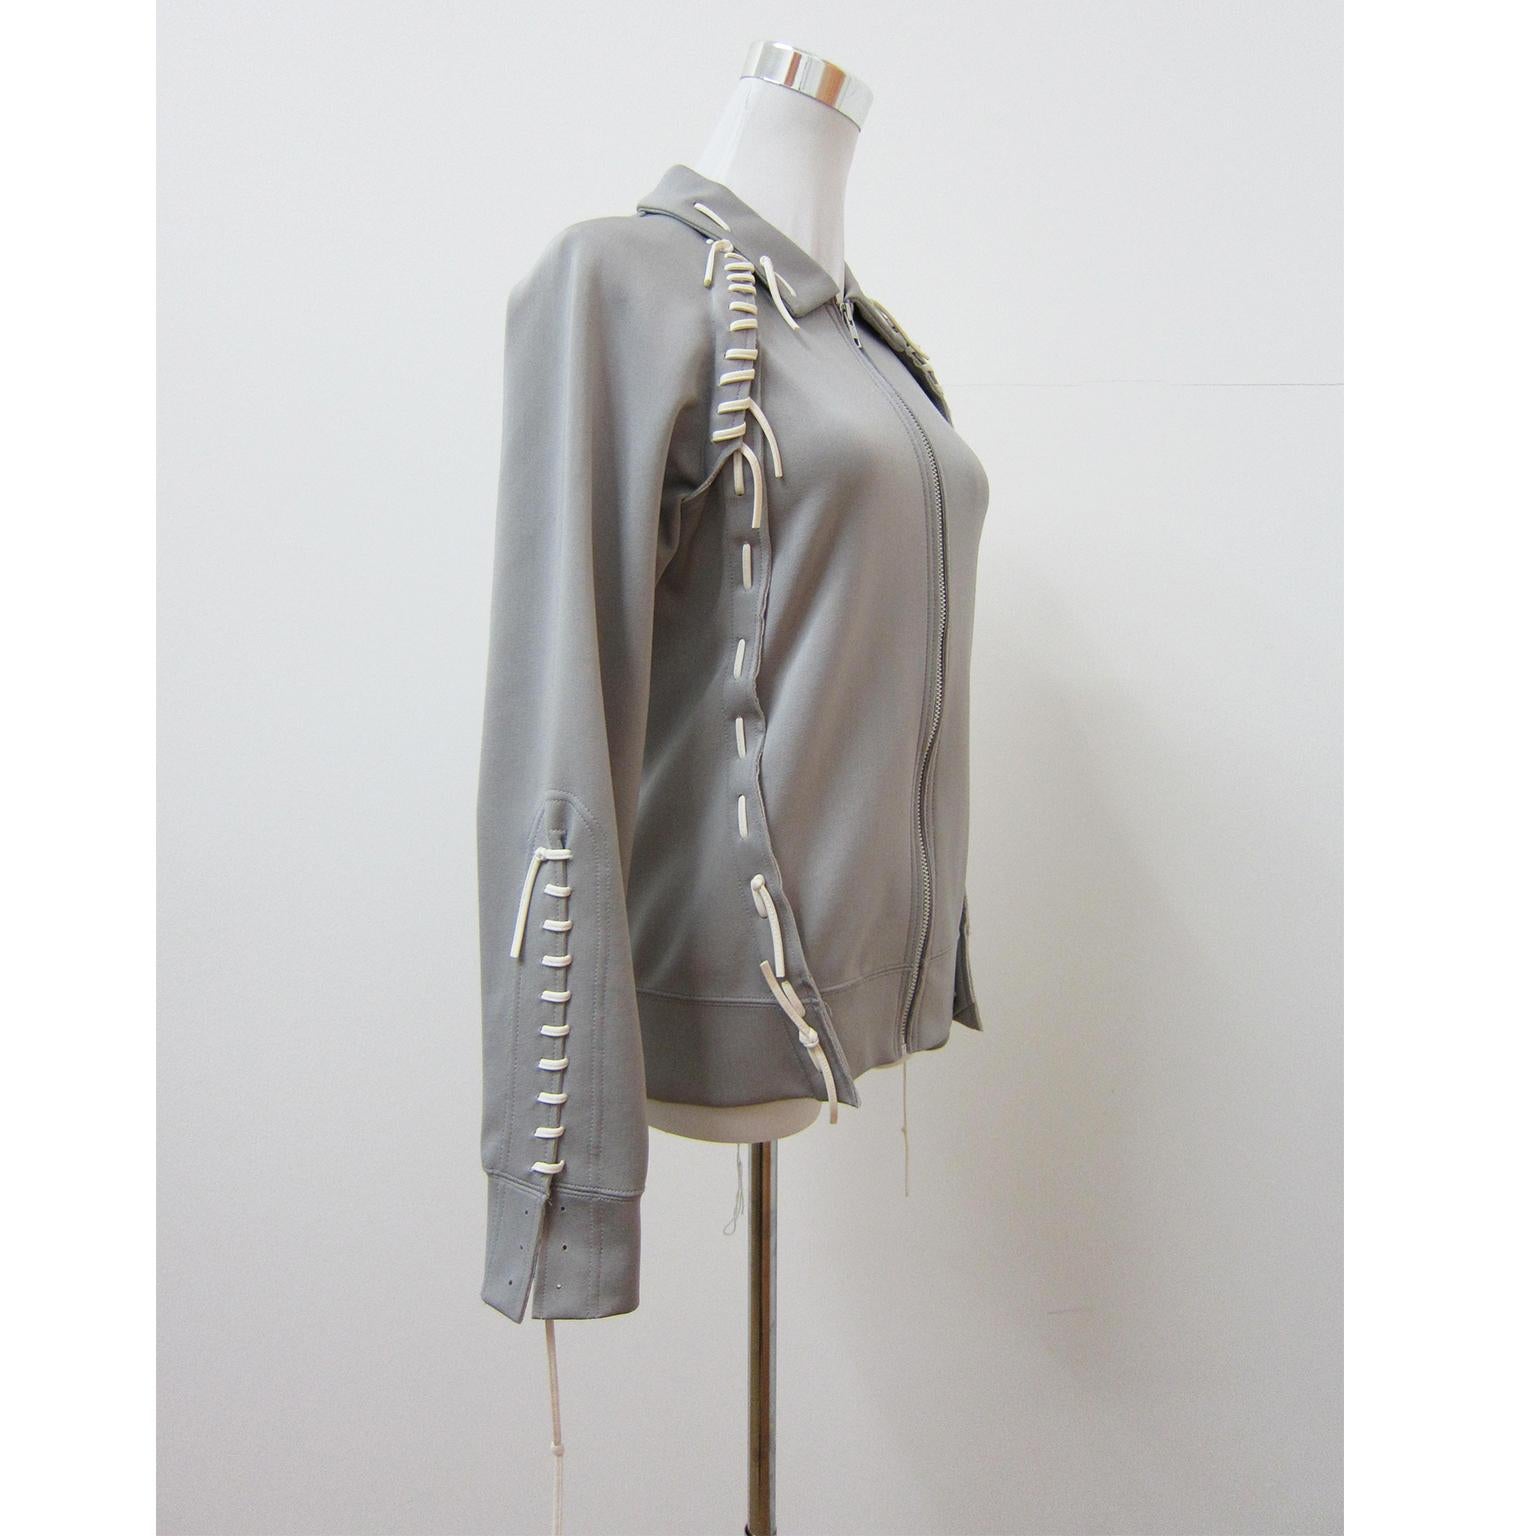 Comme des Garcons lace up detail grey jacket from collection 